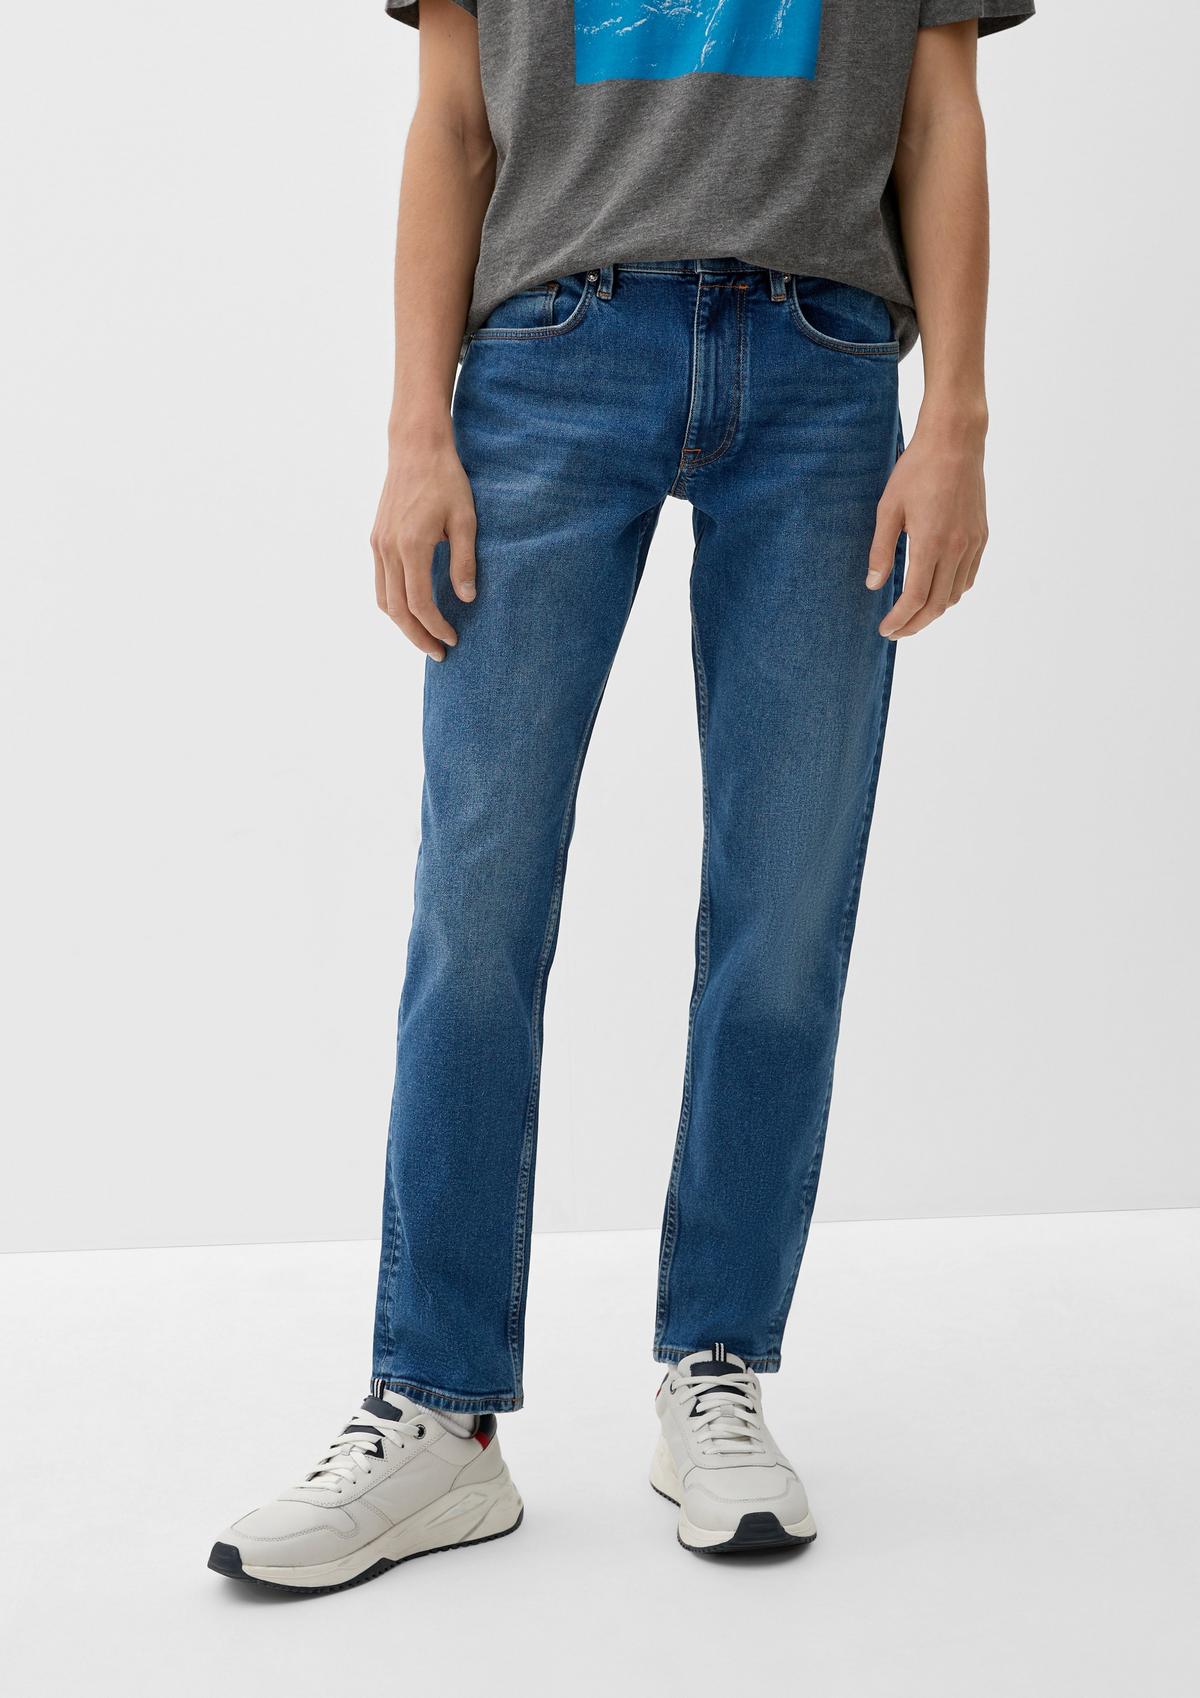 Regular: jeans with a straight leg